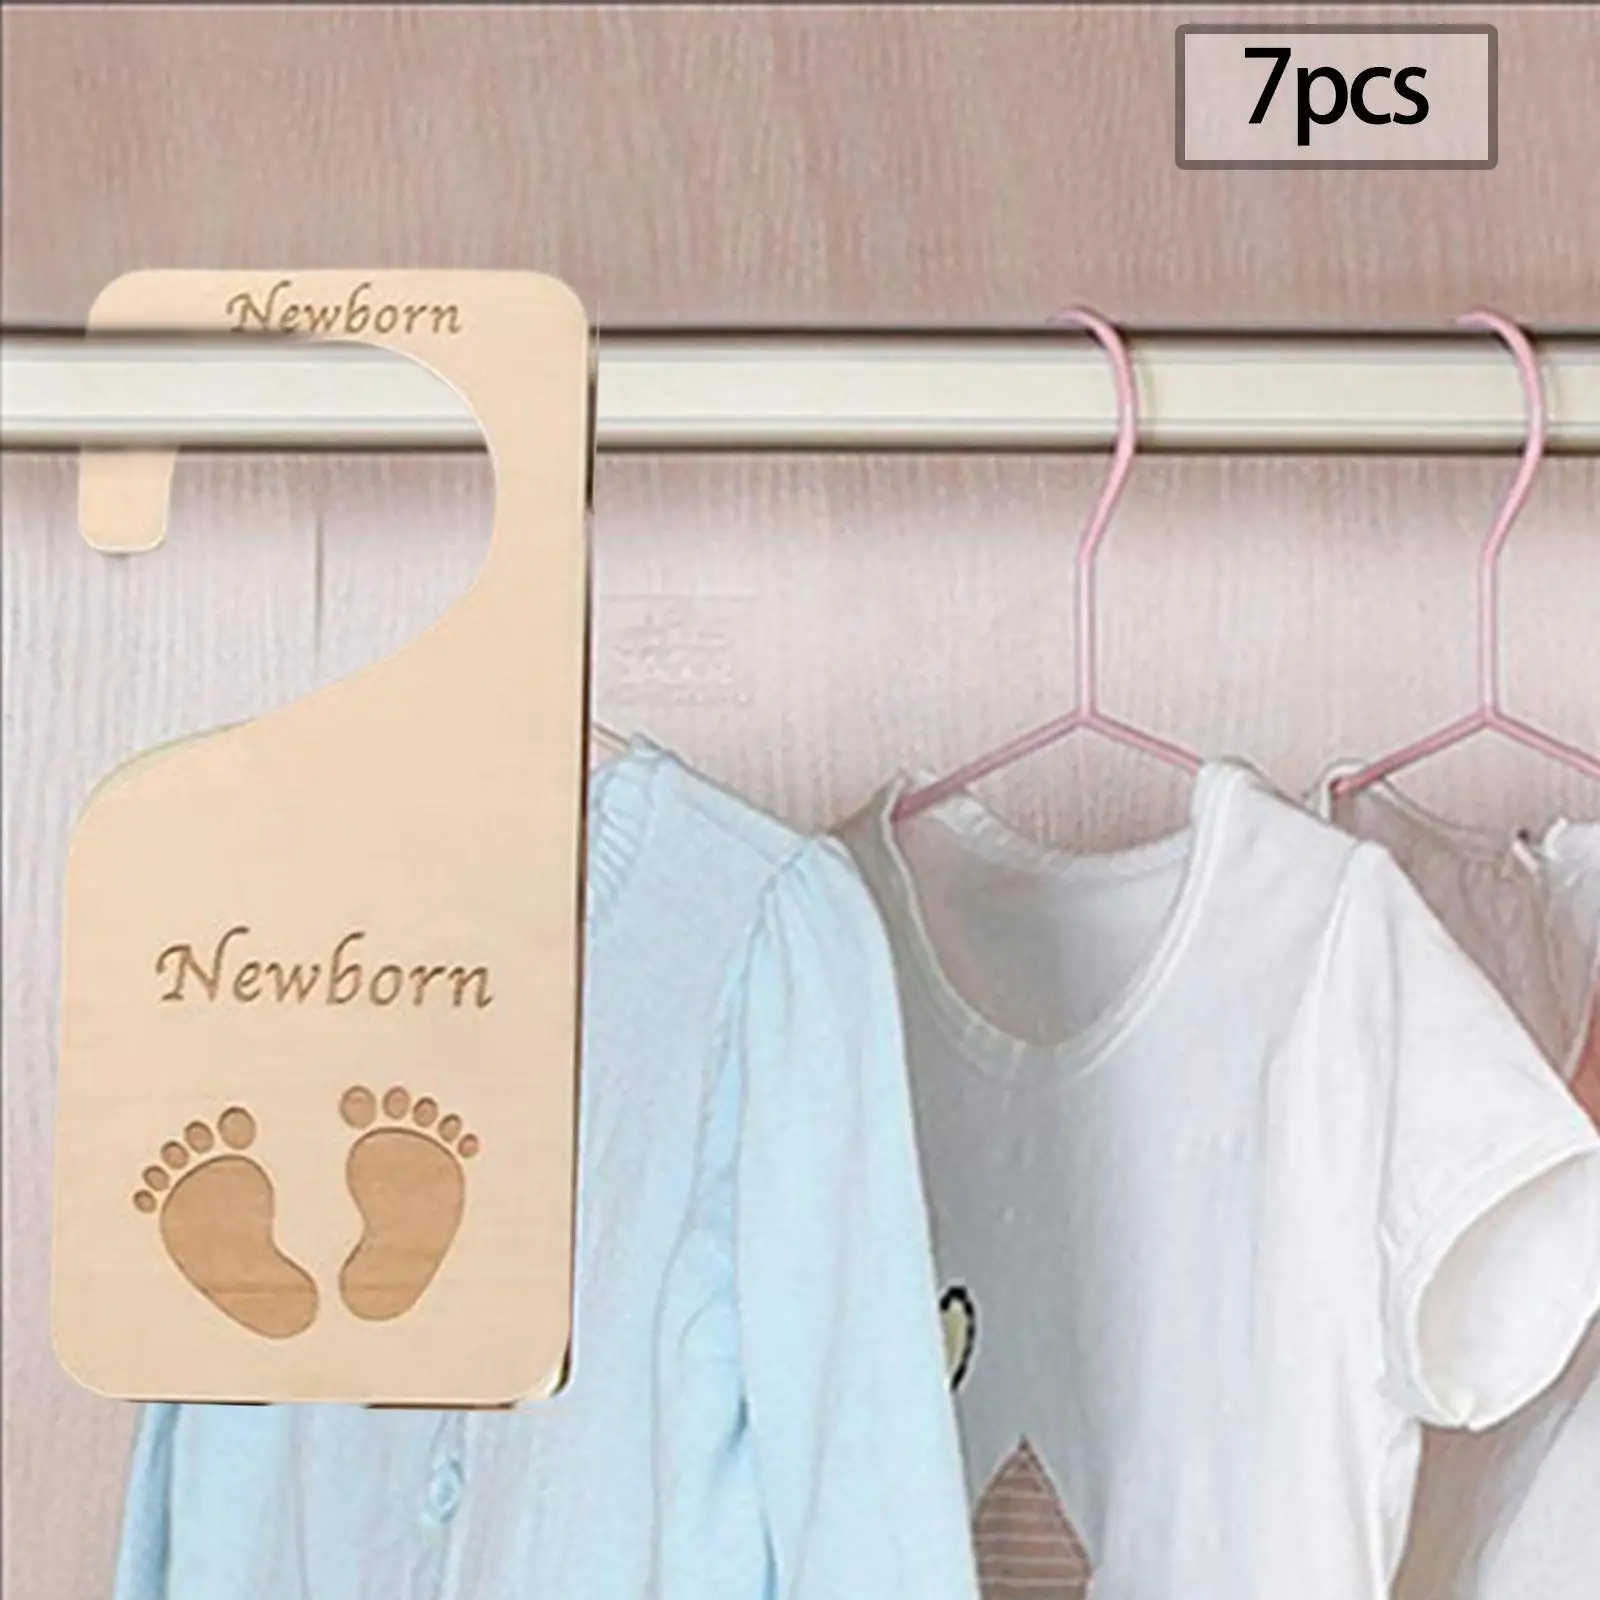 7x Adorable Wooden Closet Divider Organizer Infant Wardrobe Divider Label Newborn Closet Dividers for Bedroom Daily Use Wardrobe